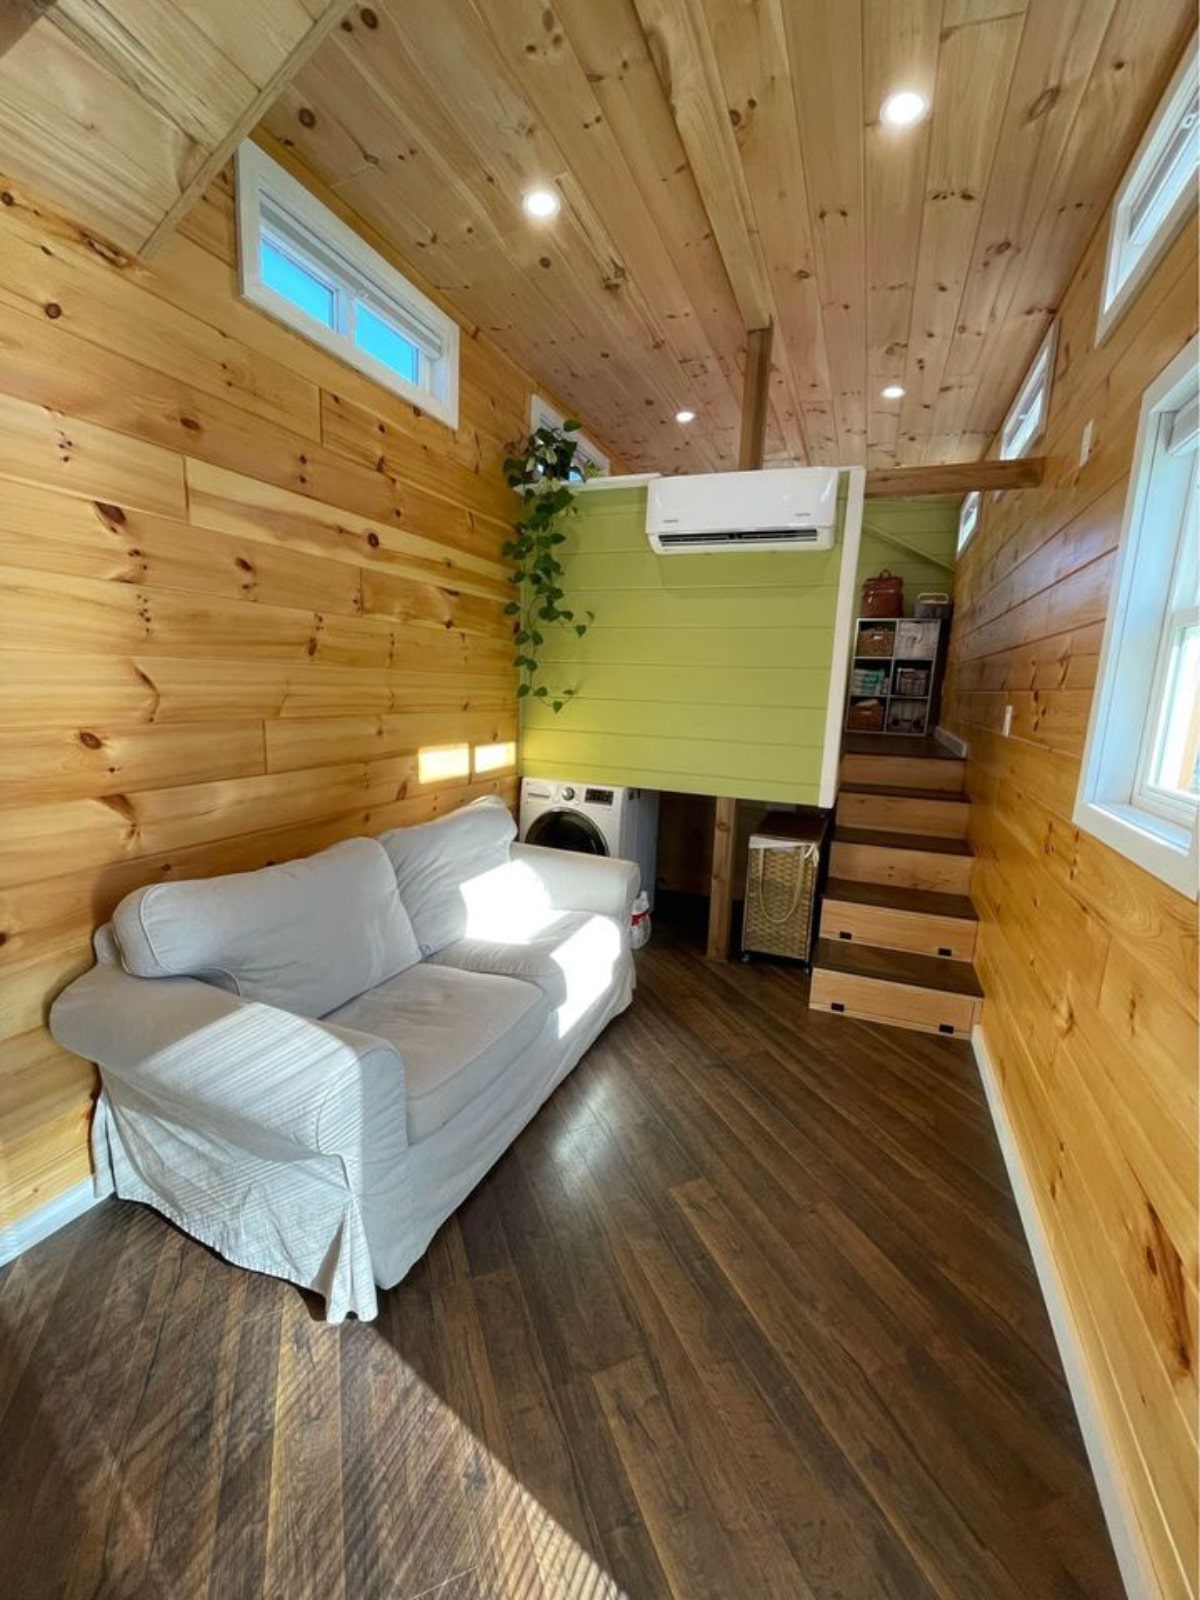 Living area of 40' Tiny House has a couch, washer dryer and air condition unit